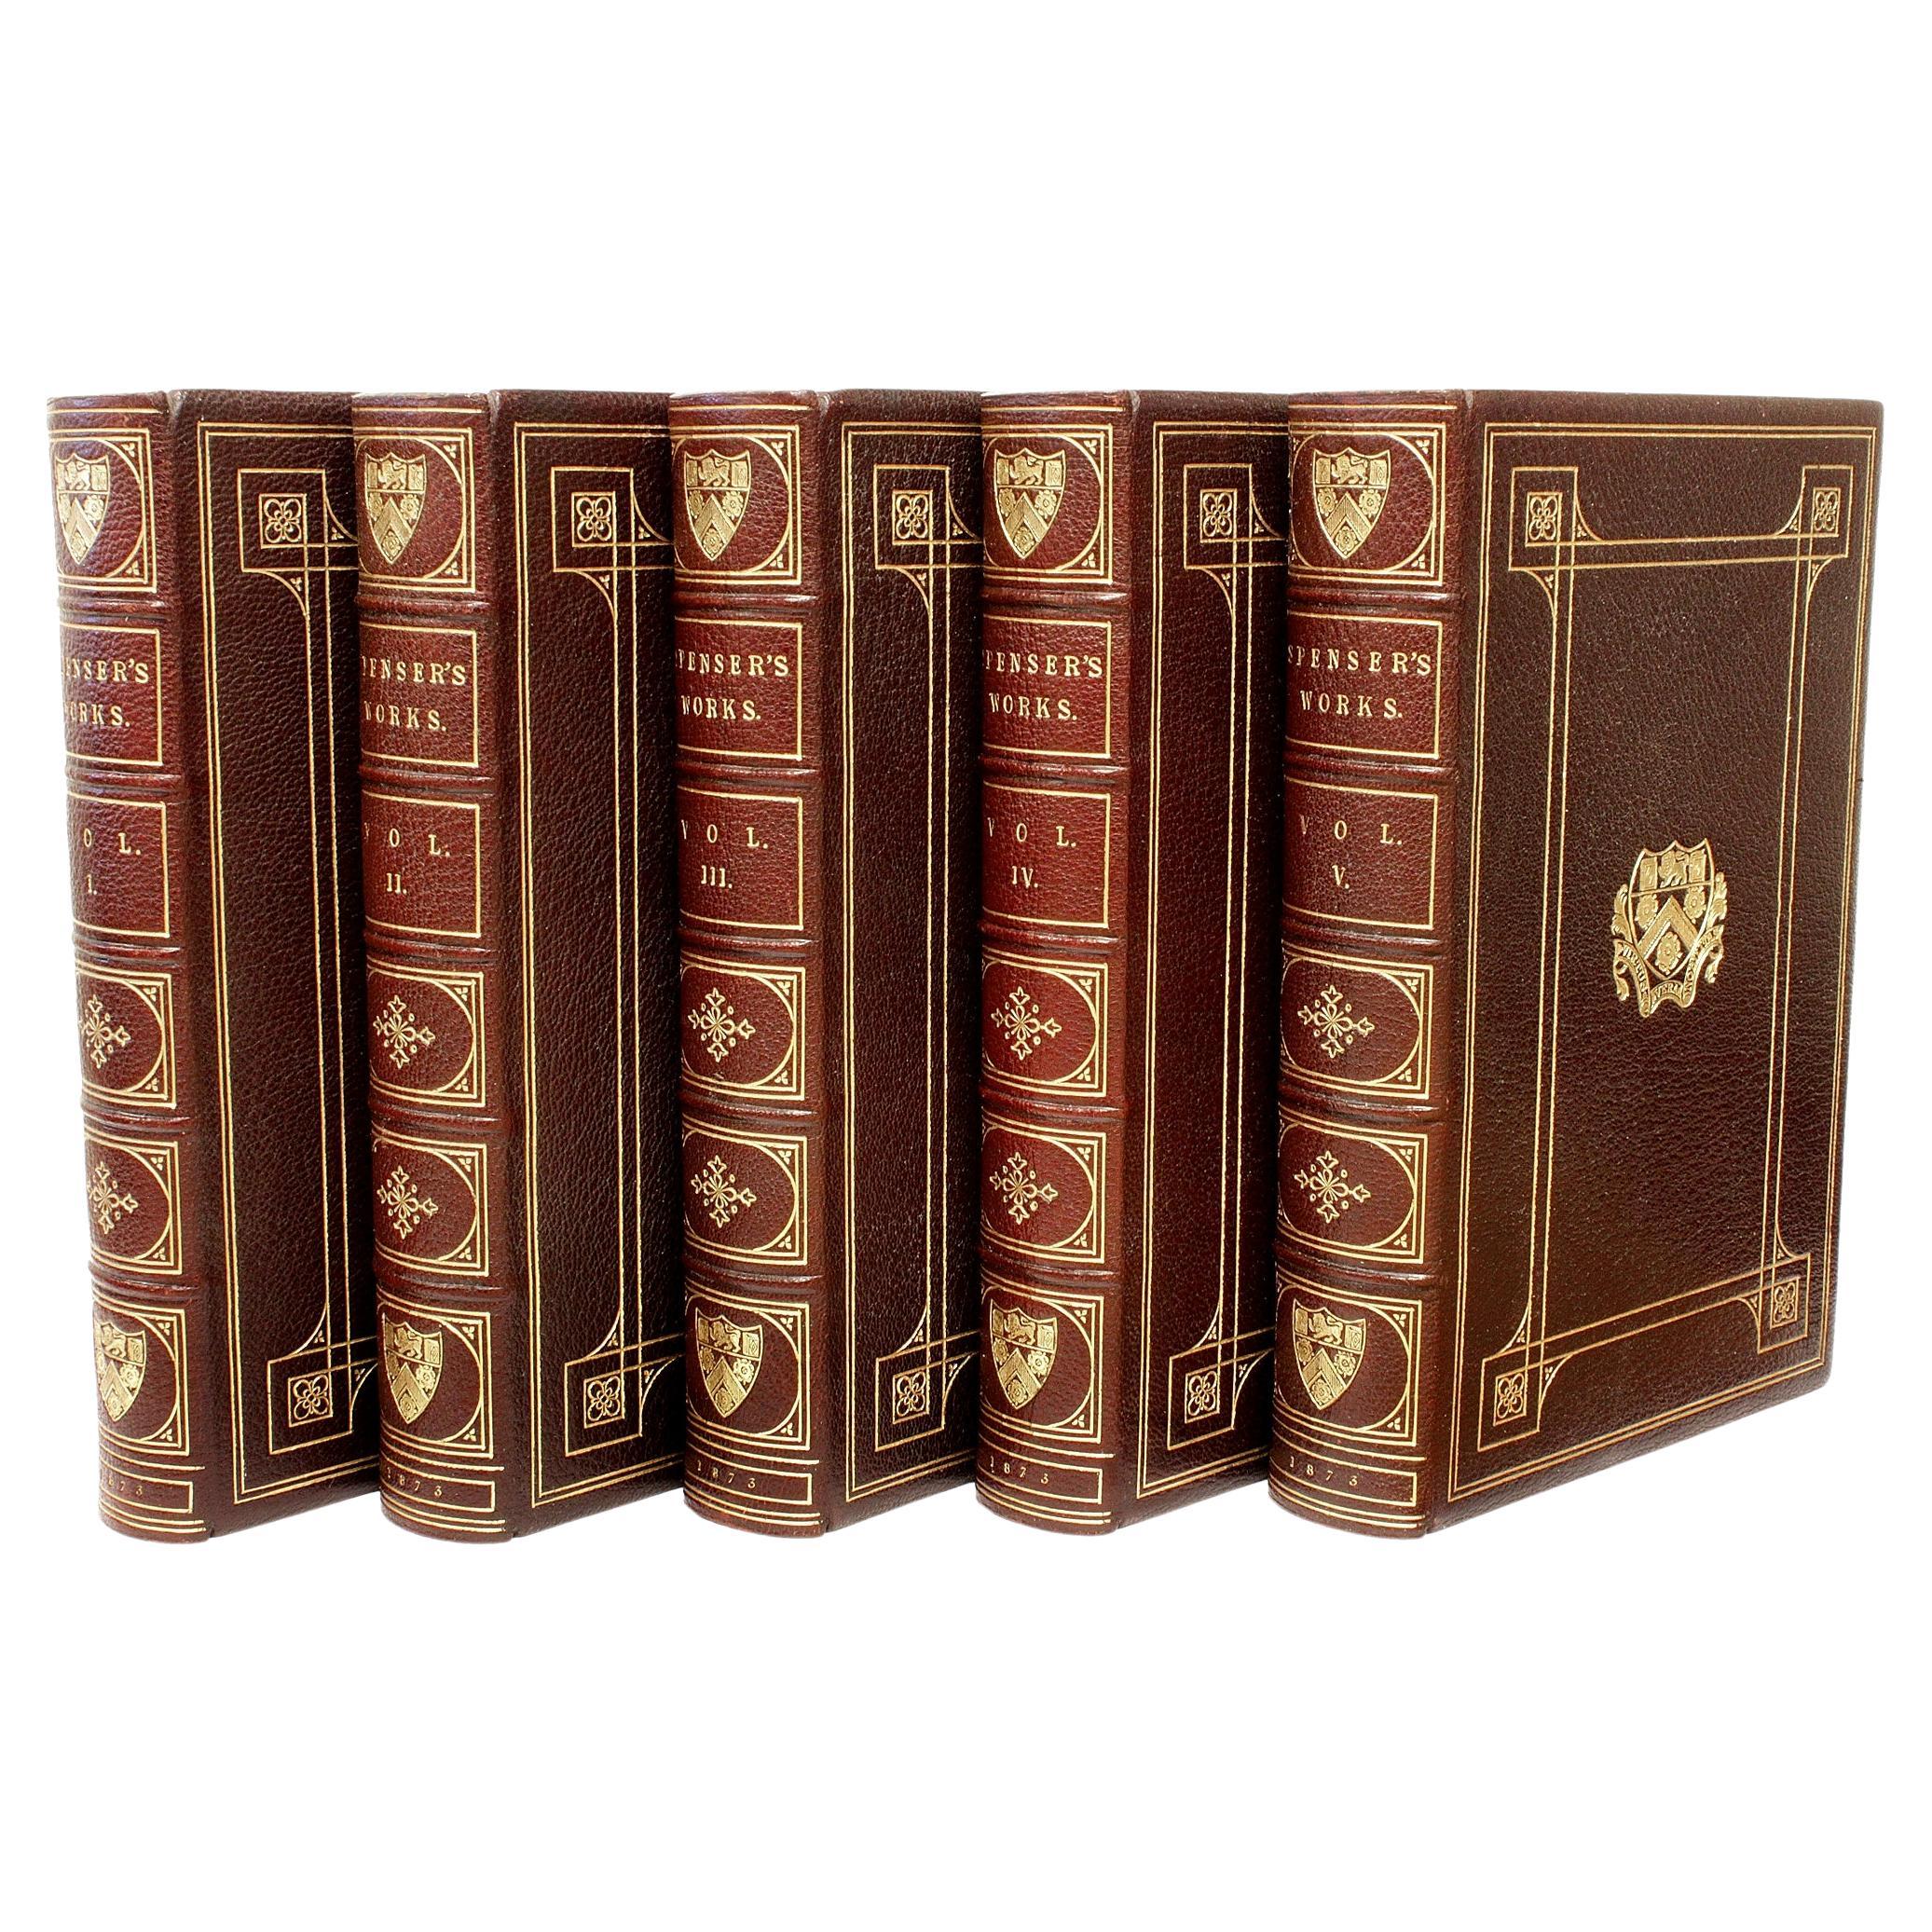 The Works Of Edmund Spenser. 5 VOLUMES - IN A FINE FULL LEATHER BINDING!